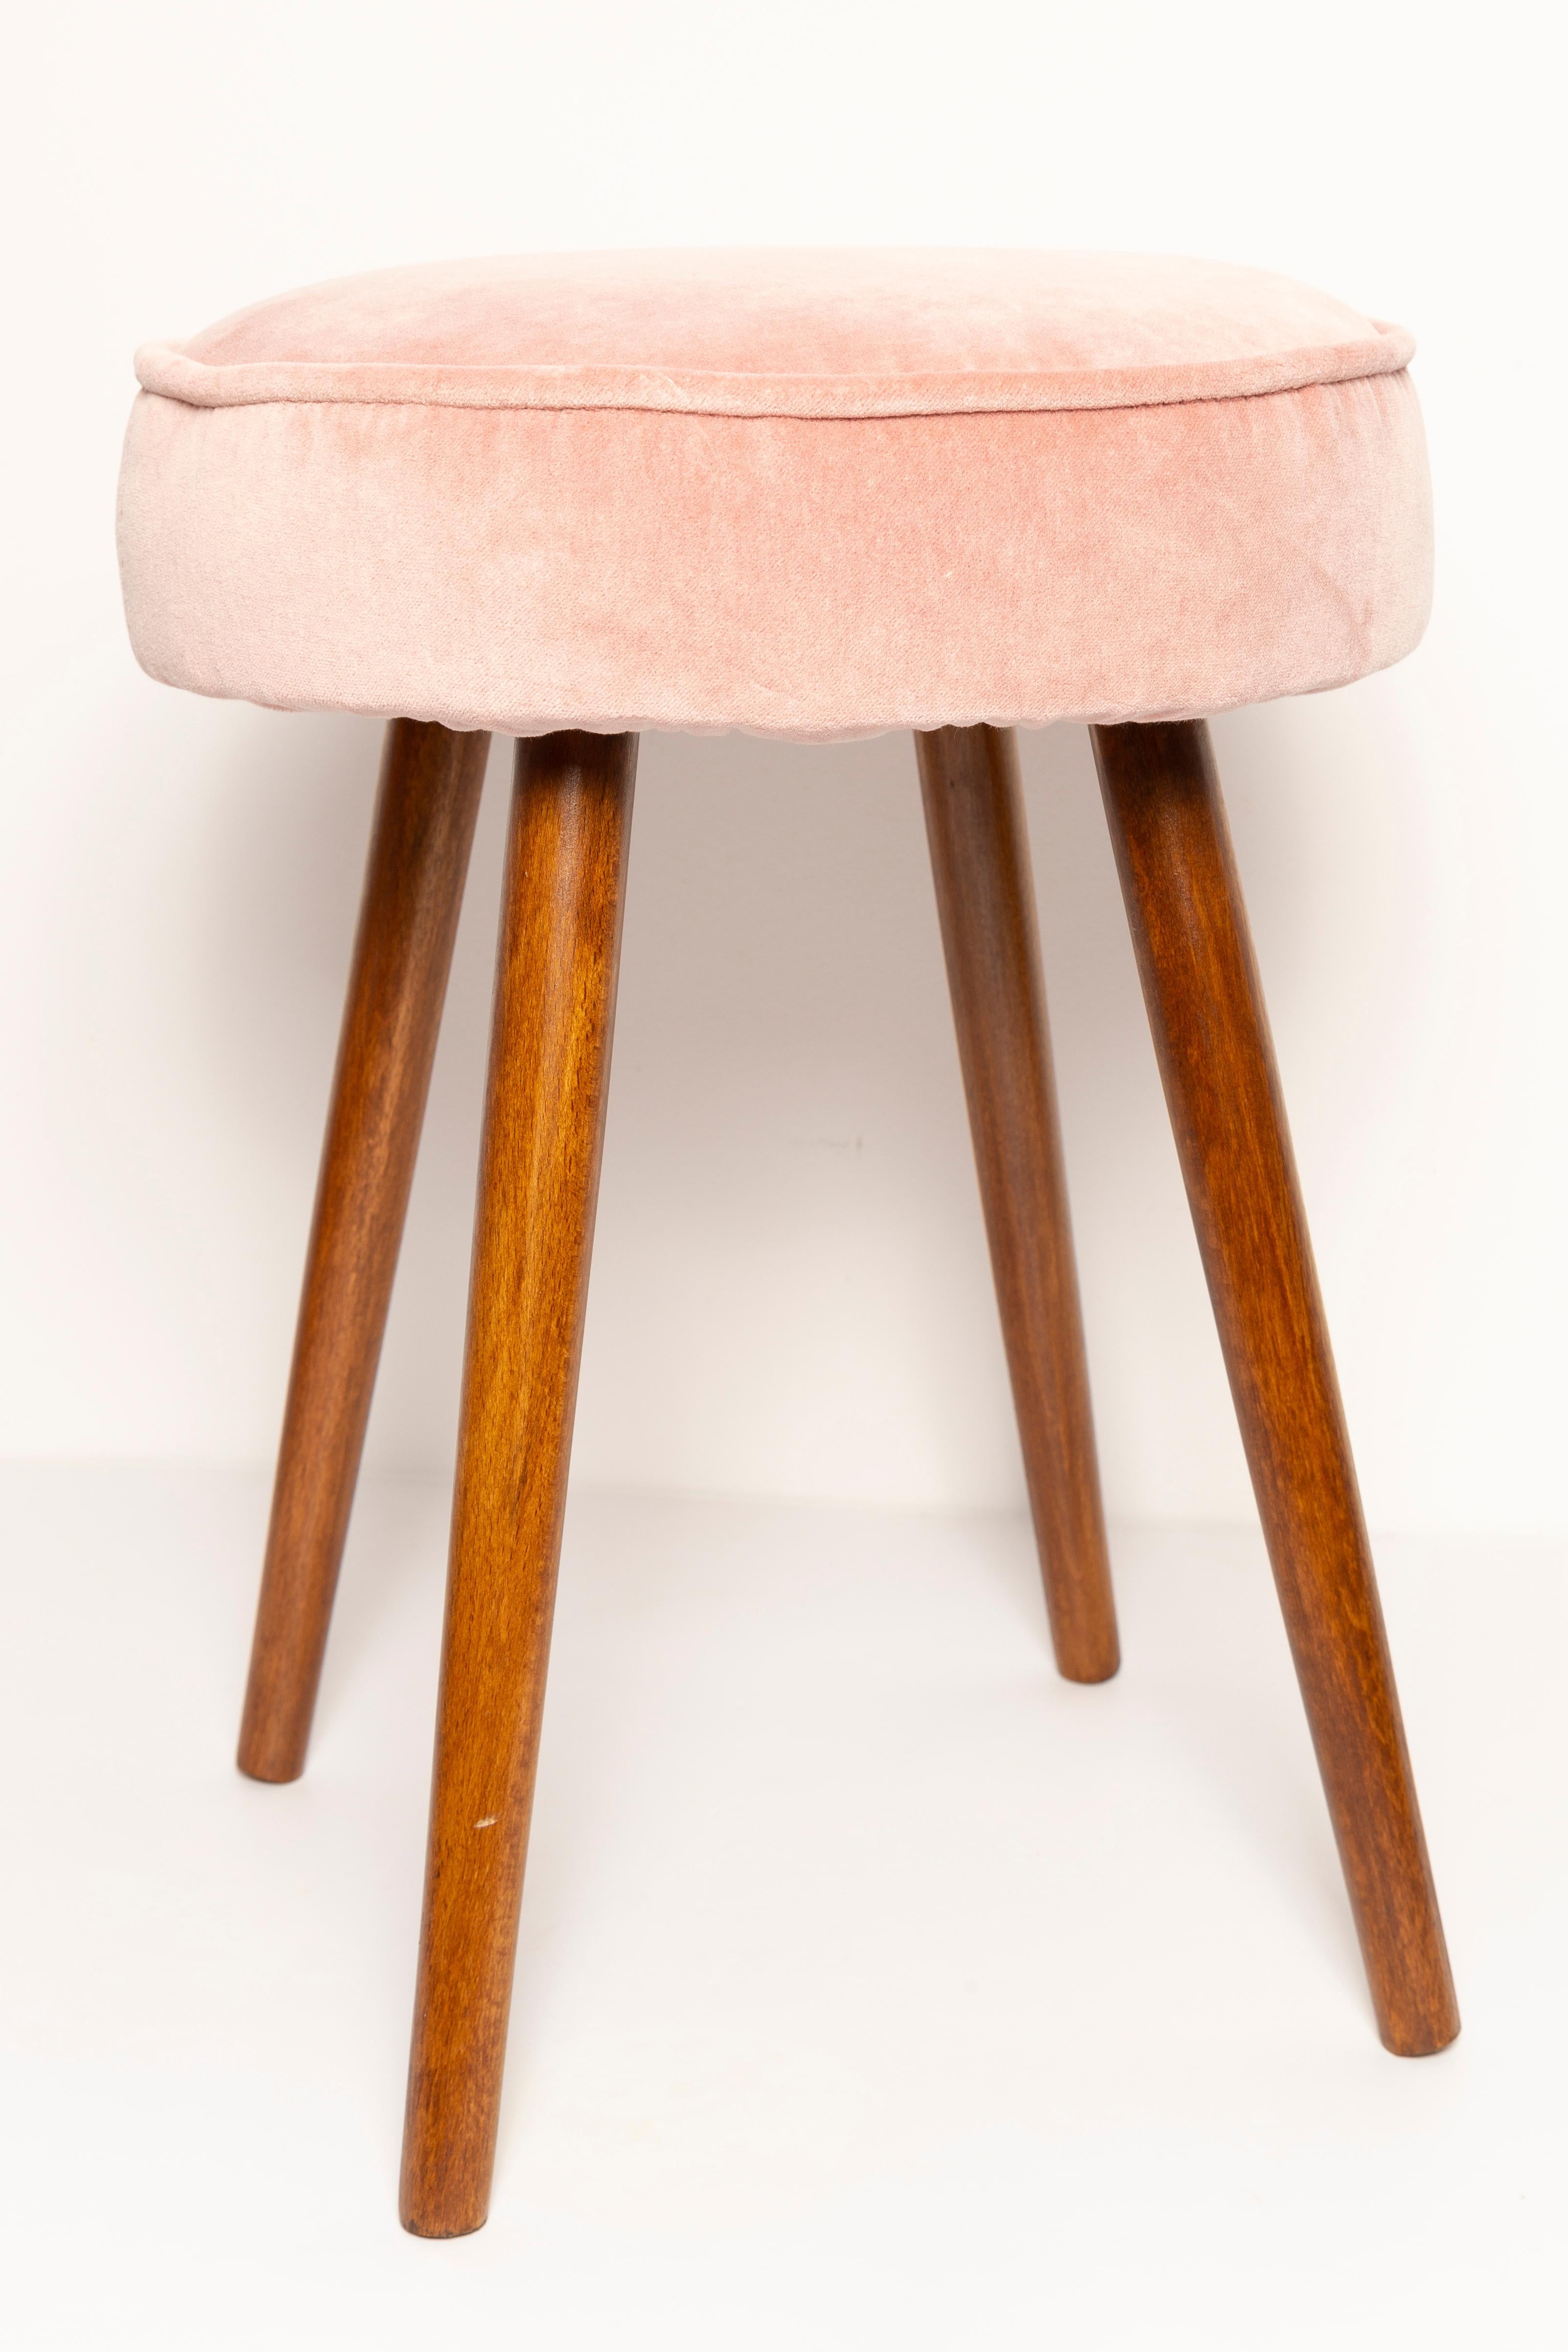 Stools from the turn of the 1960s and 1970s. Beautiful baby pink upholstery. The stool consists of an upholstered part, a seat and wooden legs narrowing downwards, characteristic of the 1960s style. We can prepare this pair also in another color of